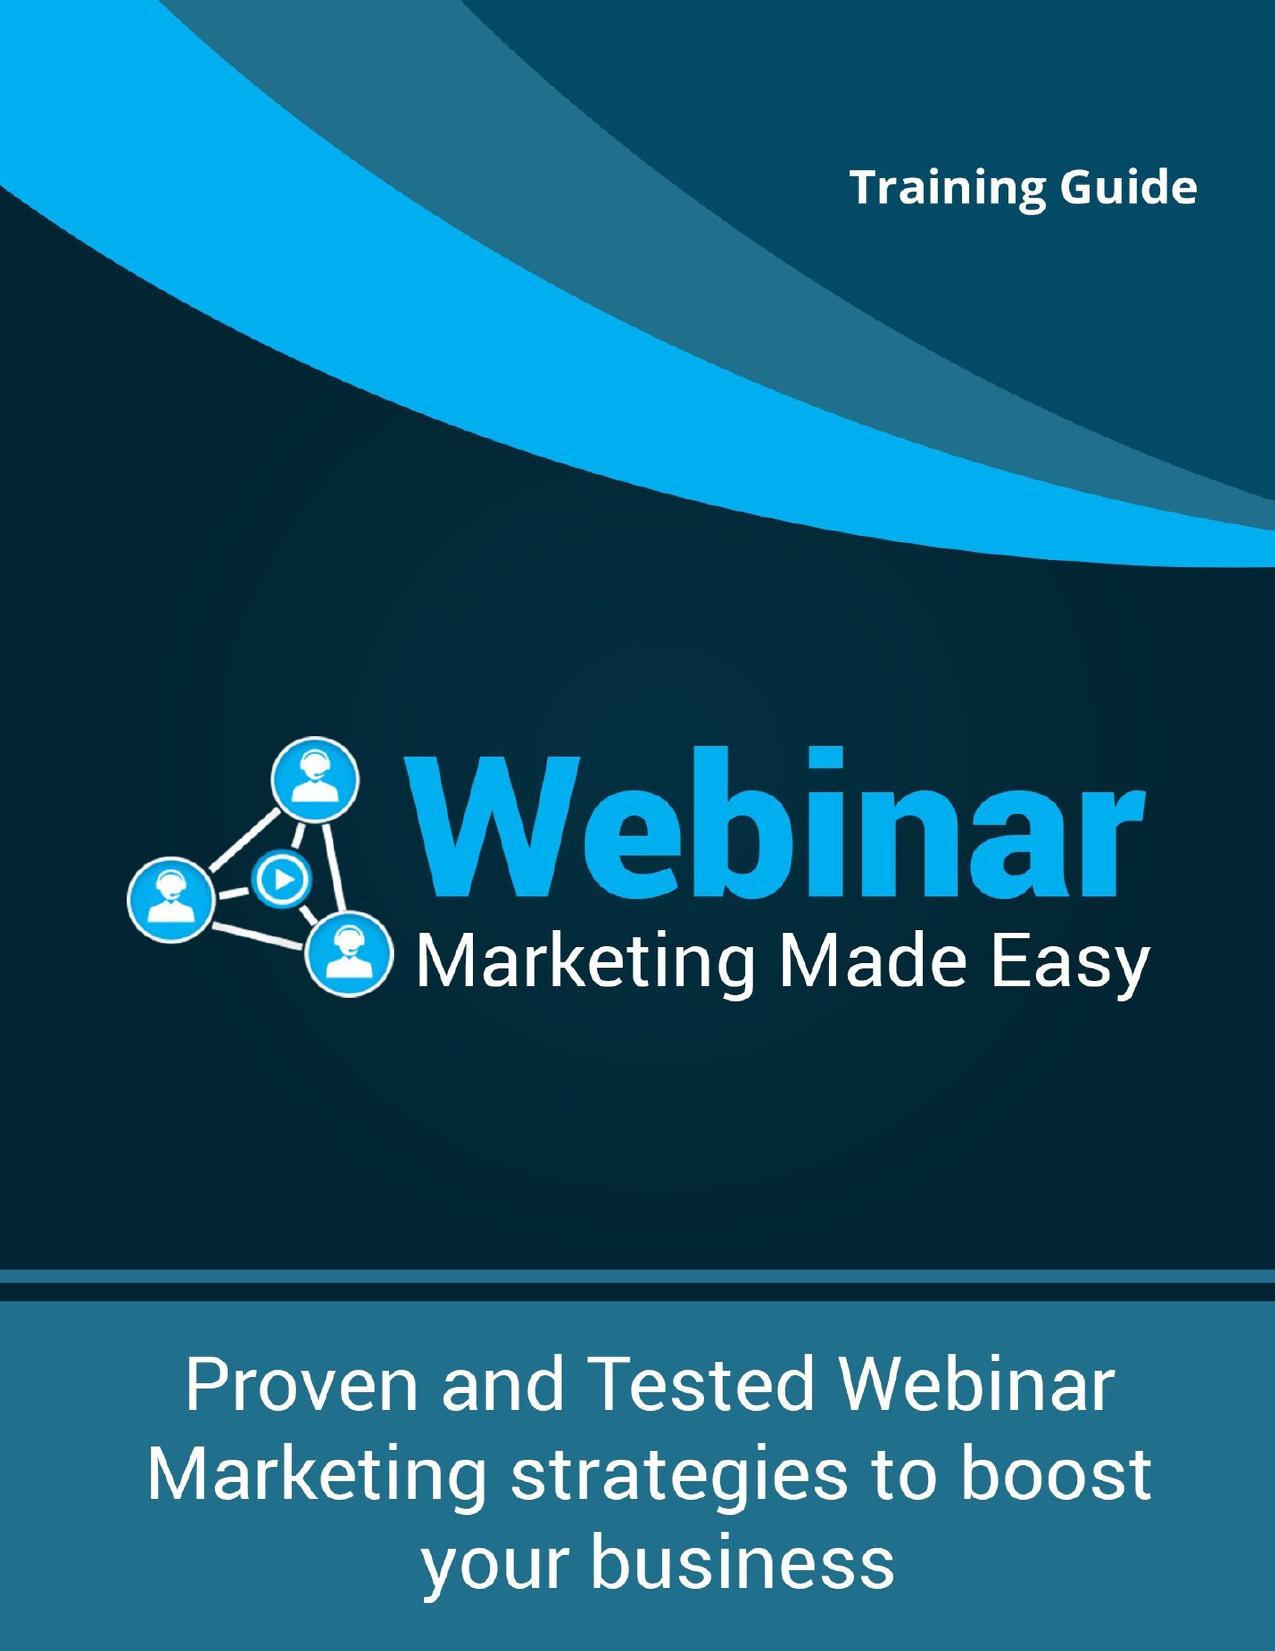 Webinar Marketing Made Easy: Proven and Tested Webinar Marketing Strategies To Boost Your Business by Marty Patton